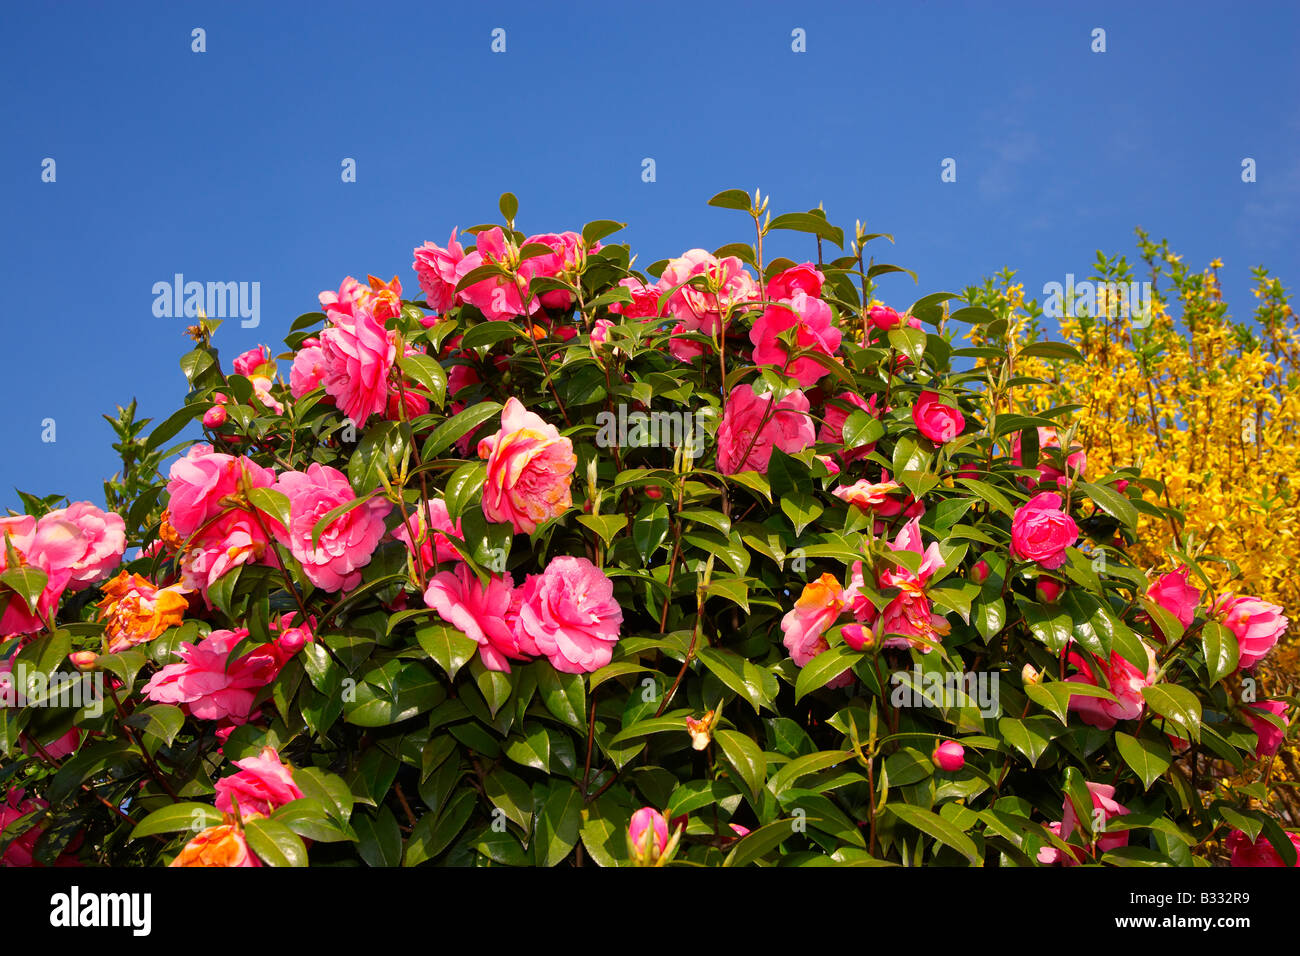 Camelia flowers against blue sky in a garden in Wales, UK Stock Photo